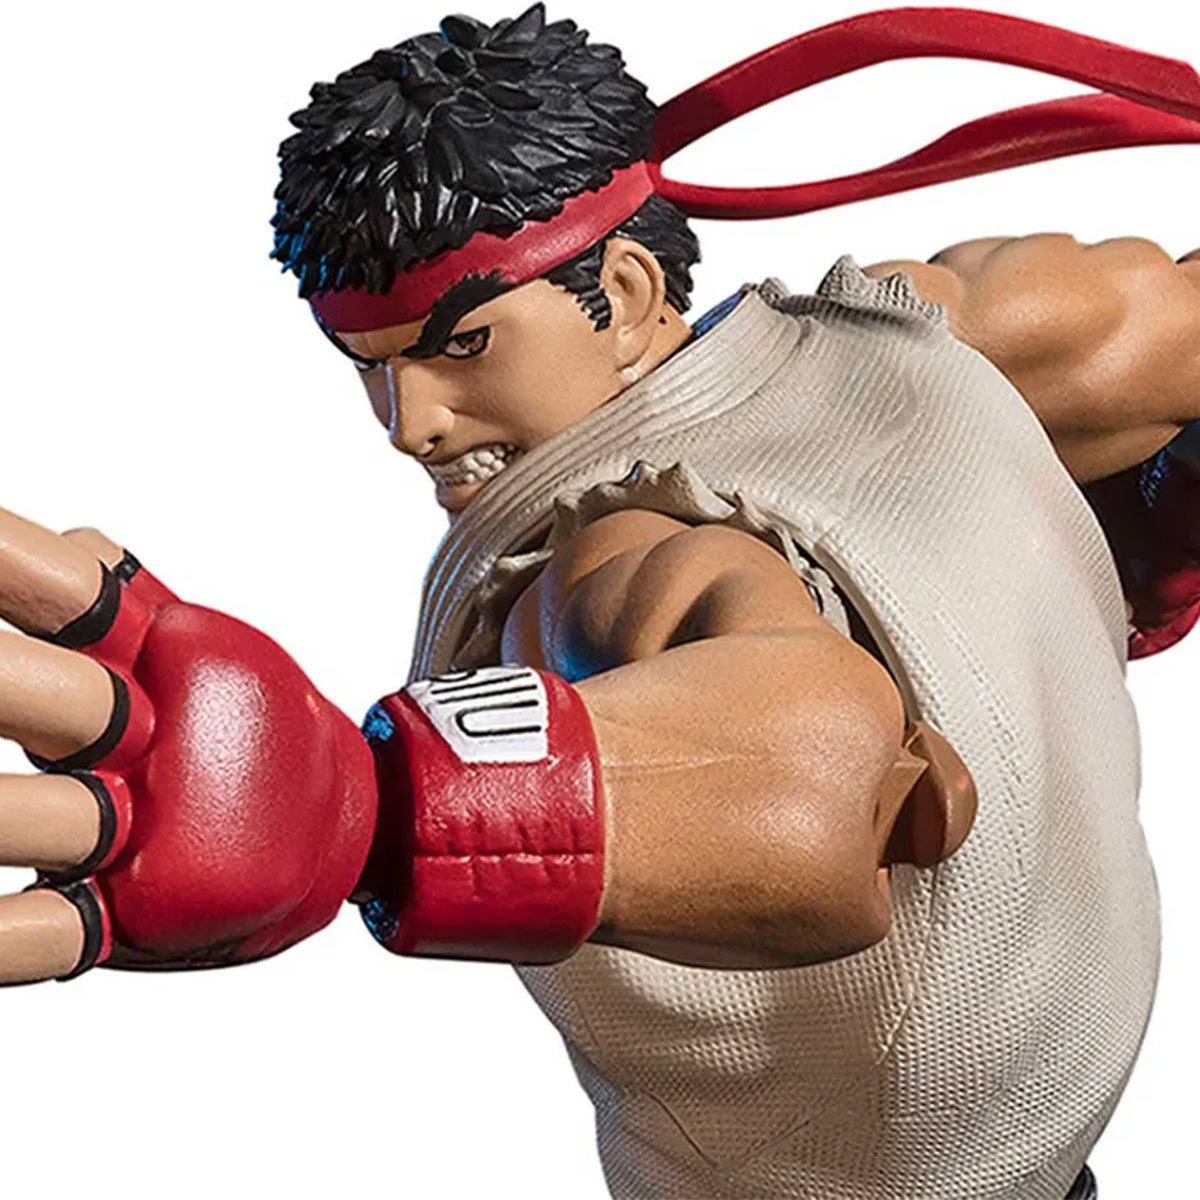 Super Complete Selection Games STREET FIGHTER RYU HADOUKEN GLOVE